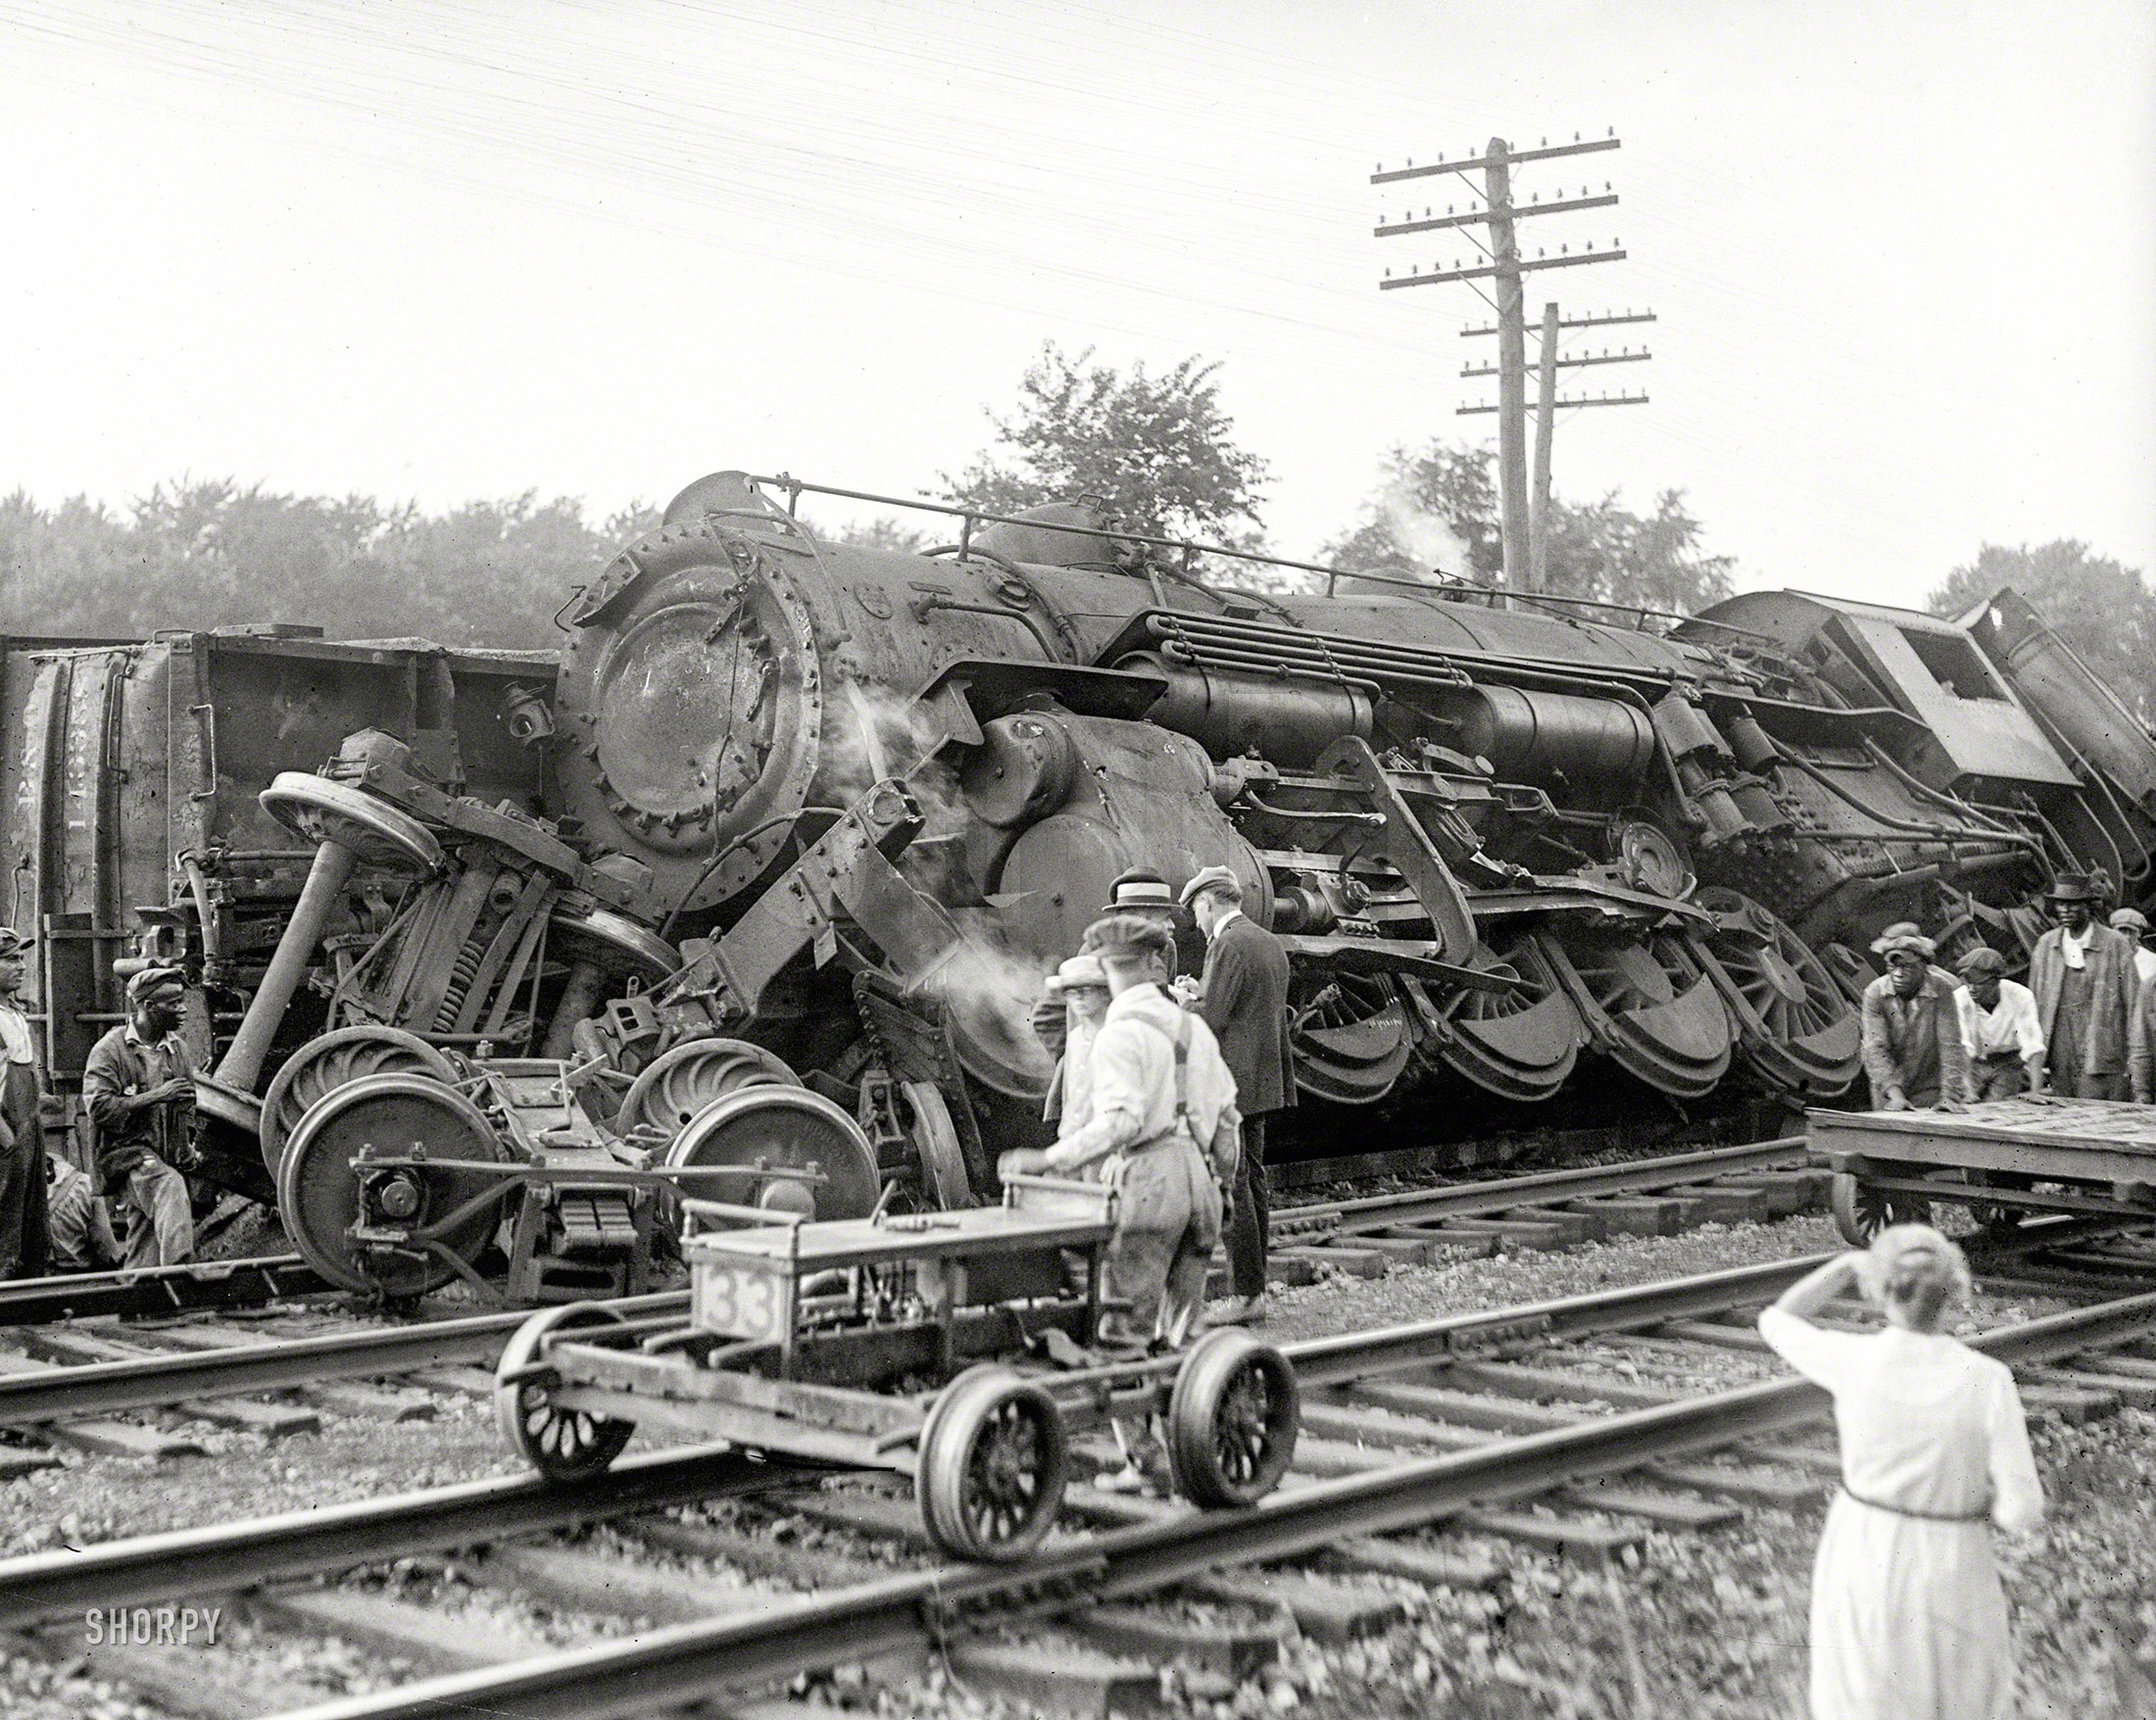 July 31, 1922. Laurel, Maryland. "Two B&O freights wrecked in head-on crash at Laurel switch." National Photo Company glass negative. View full size.